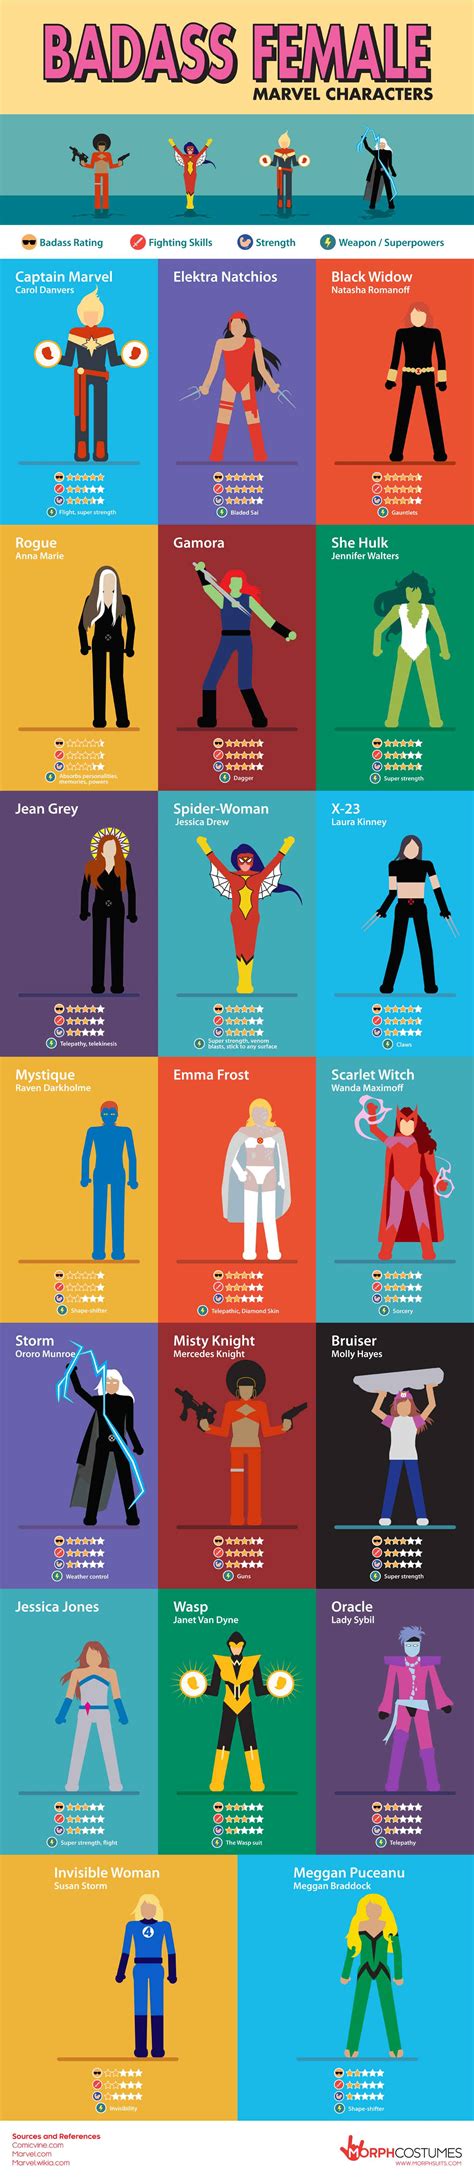 [infographic] Most Badass Female Marvel Characters — Major